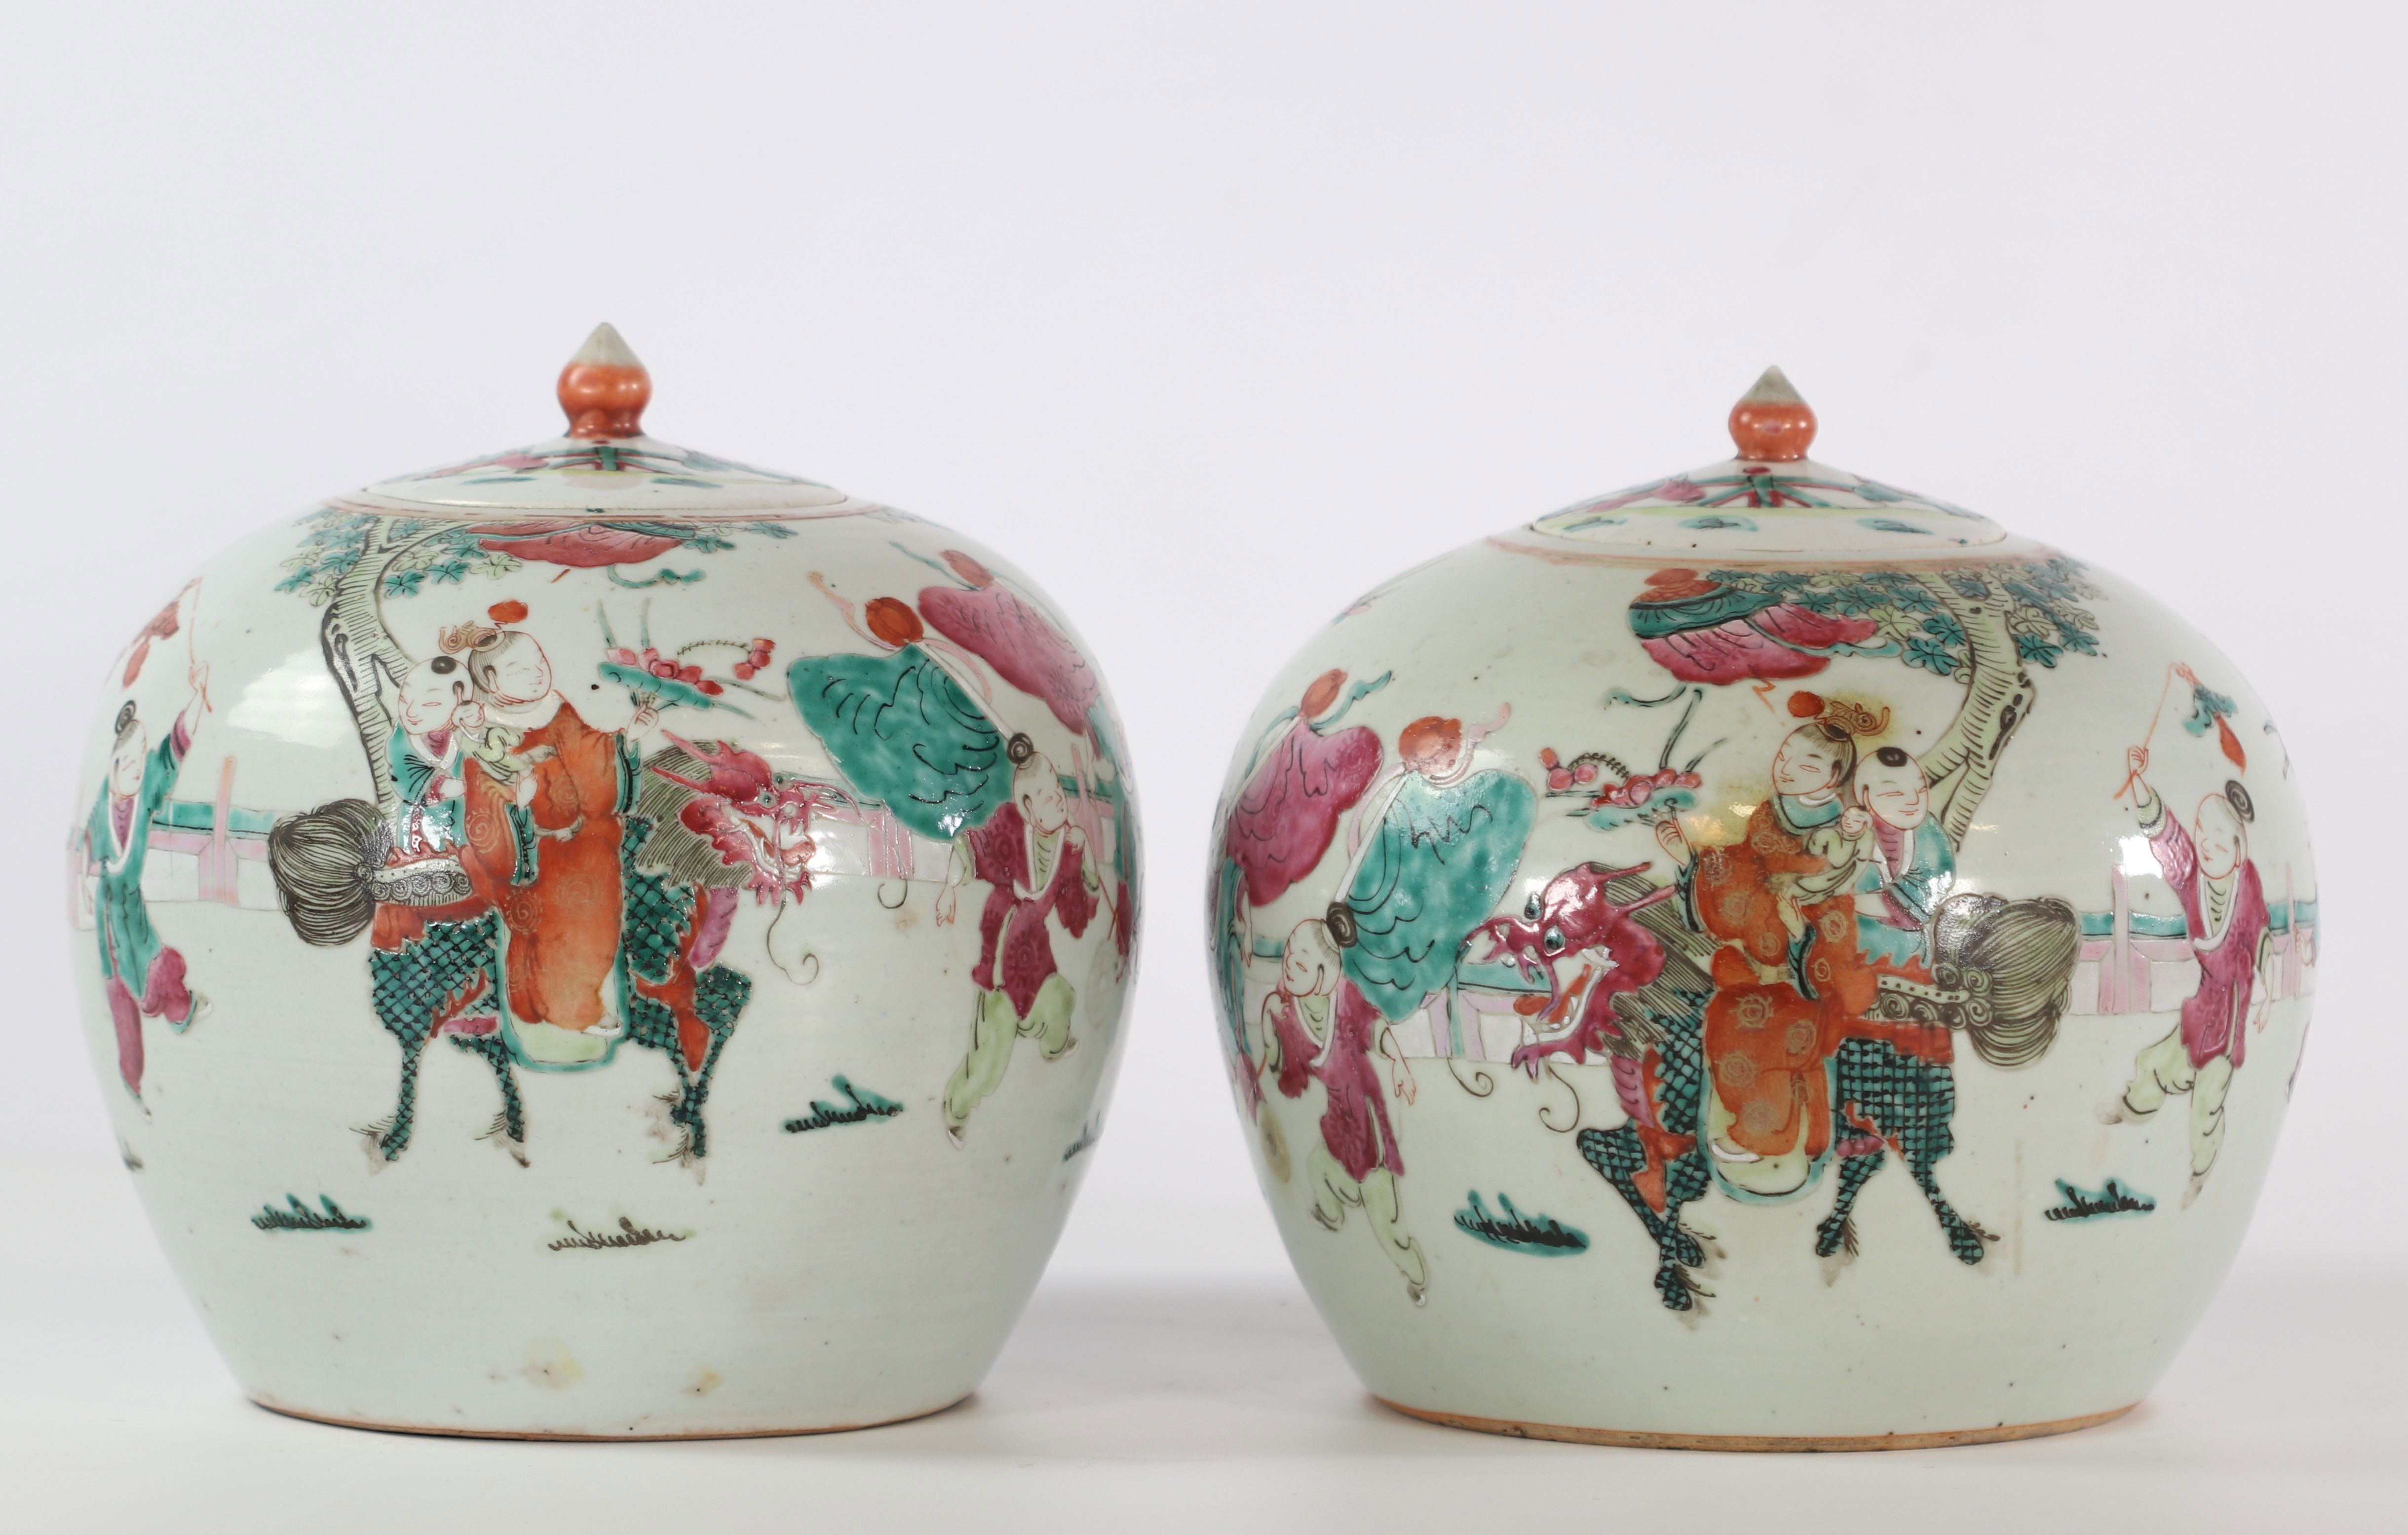 China pair of famille rose covered porcelain vase decorated with characters and dragons 19th